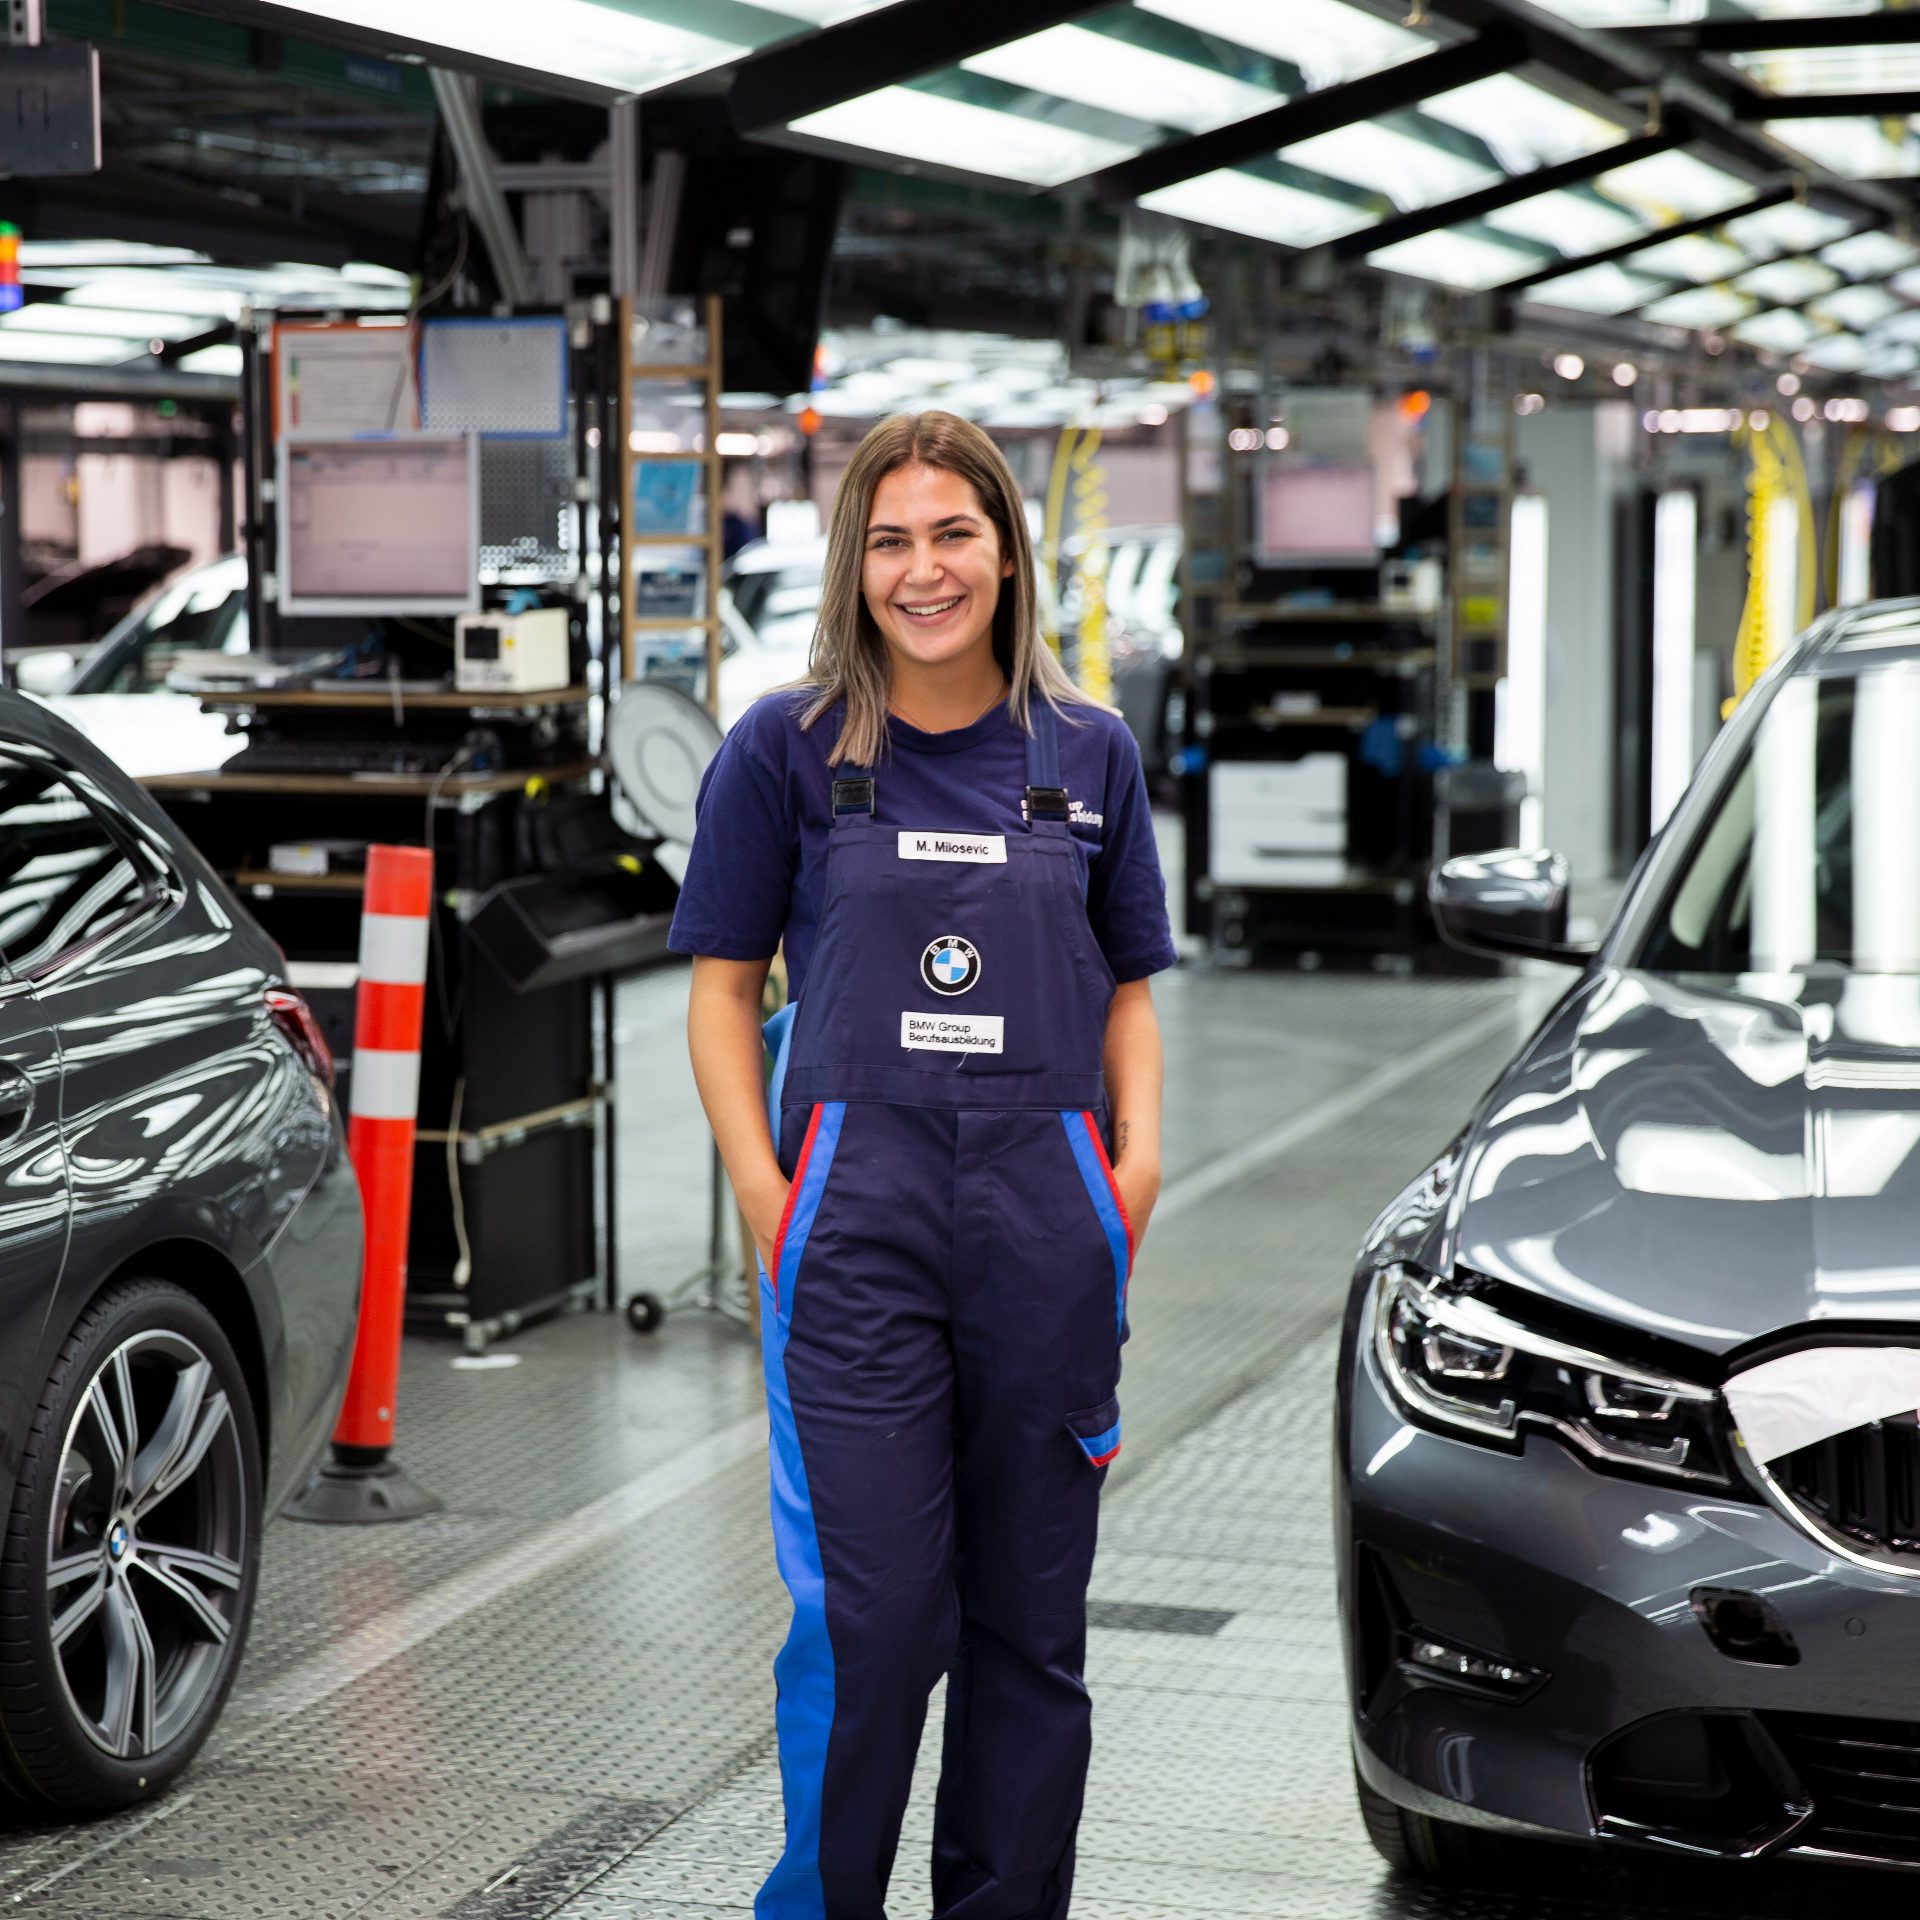 The picture shows a production mechanics apprentice at BMW.